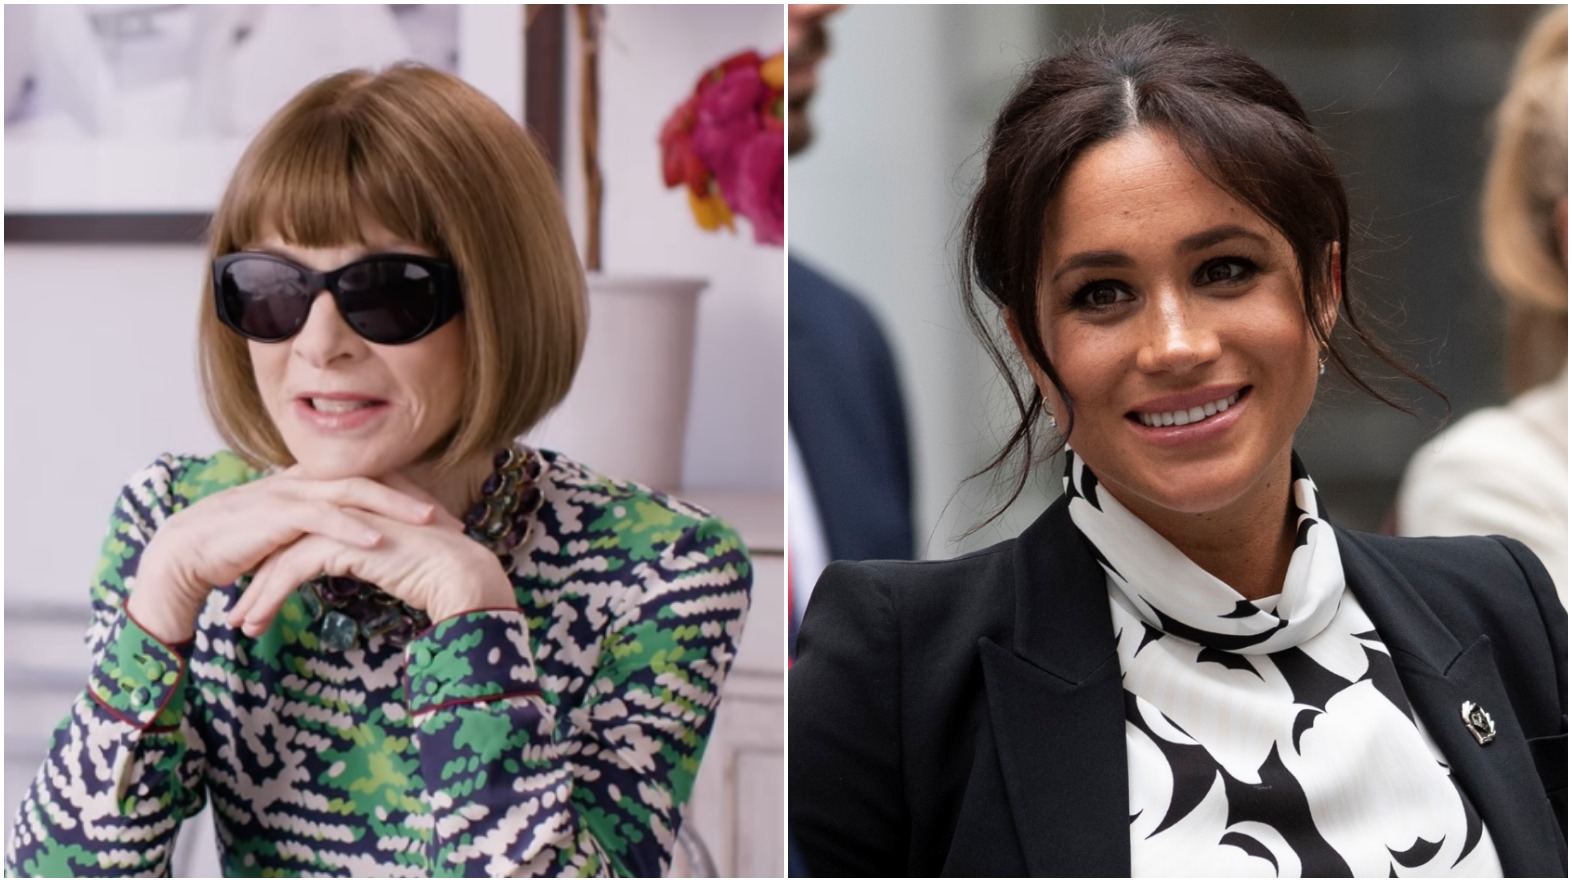 Chief69 Com Porn - Anna Wintour Approves of Meghan Markle's Maternity Outfits